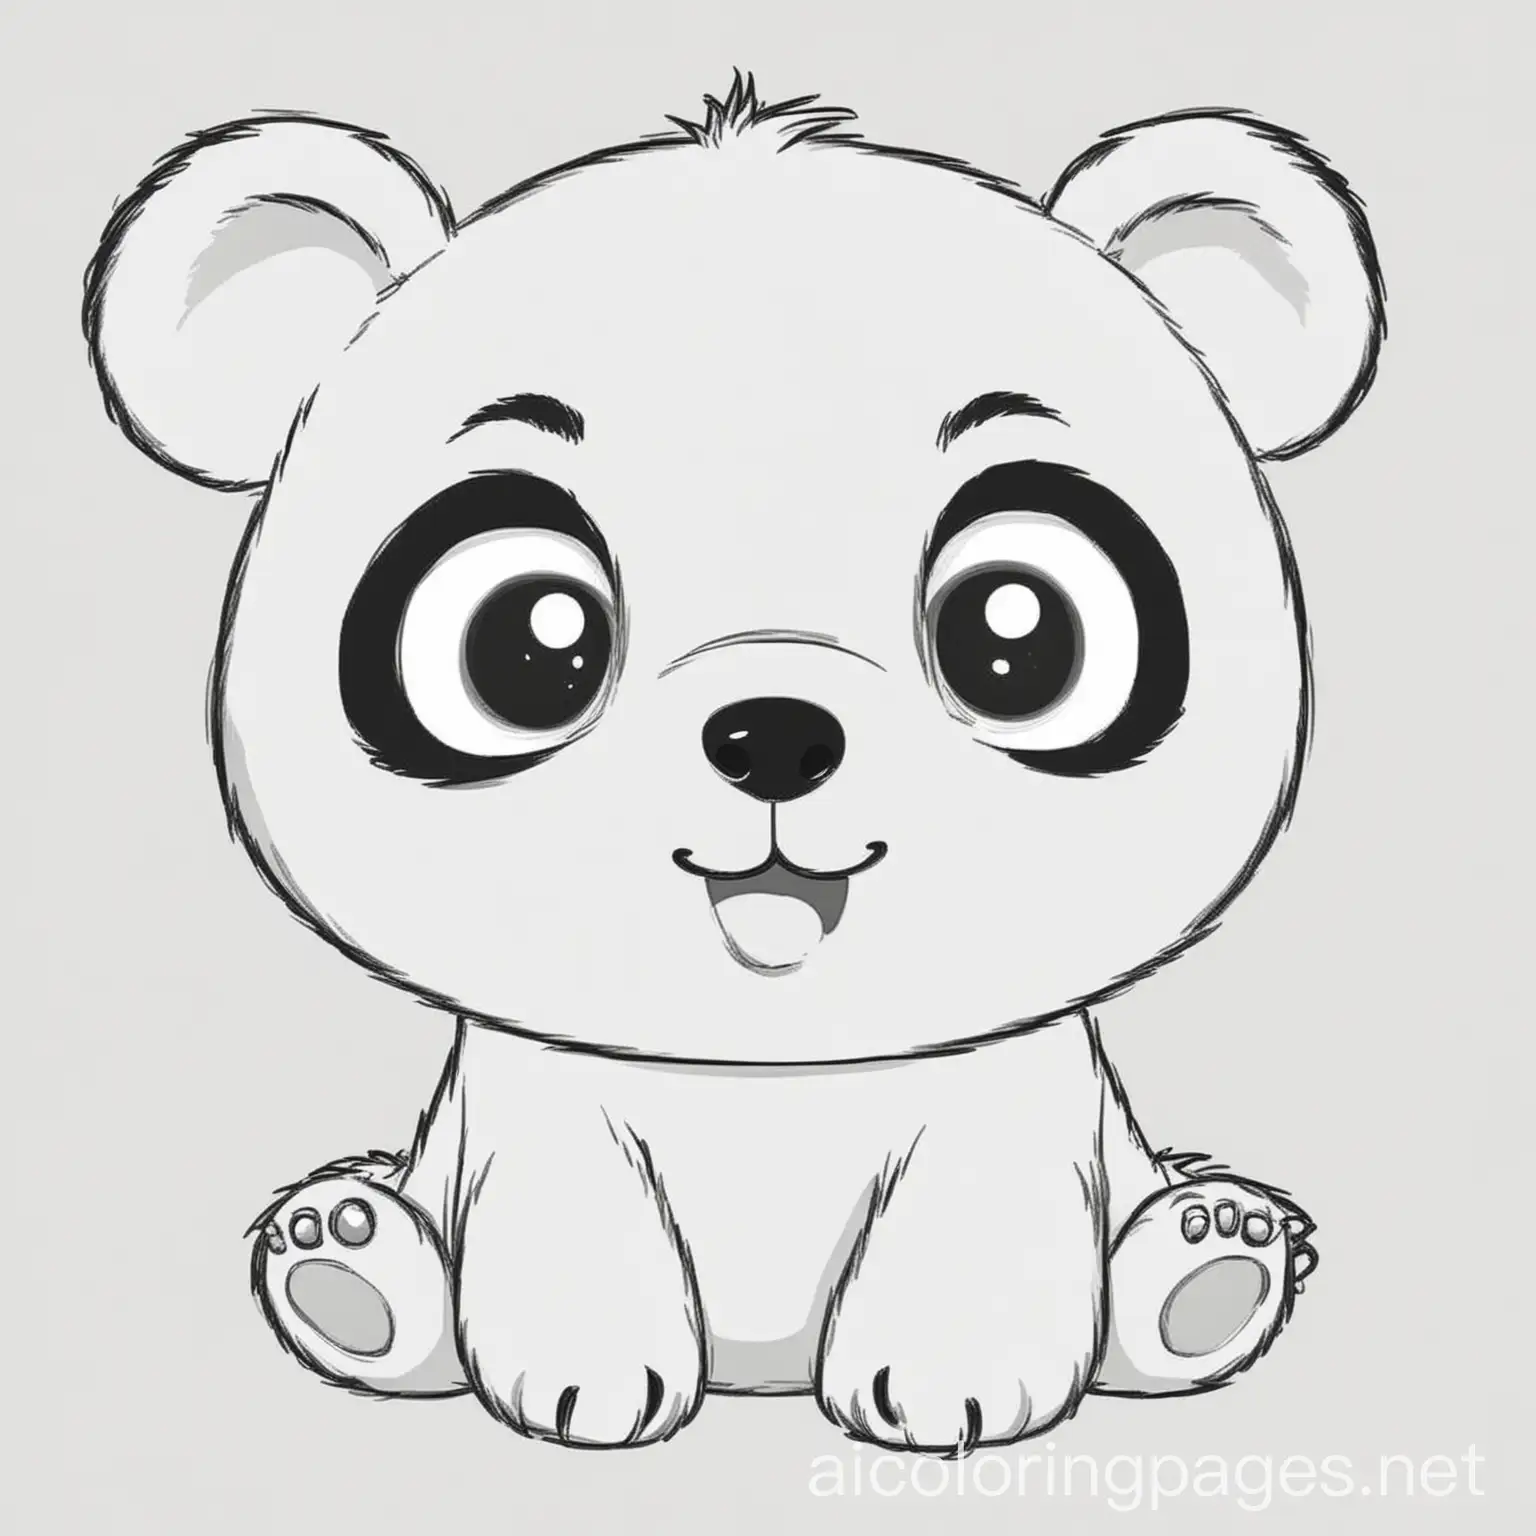 Happy-Panda-Coloring-Page-with-Big-Eyes-and-Simple-Lines